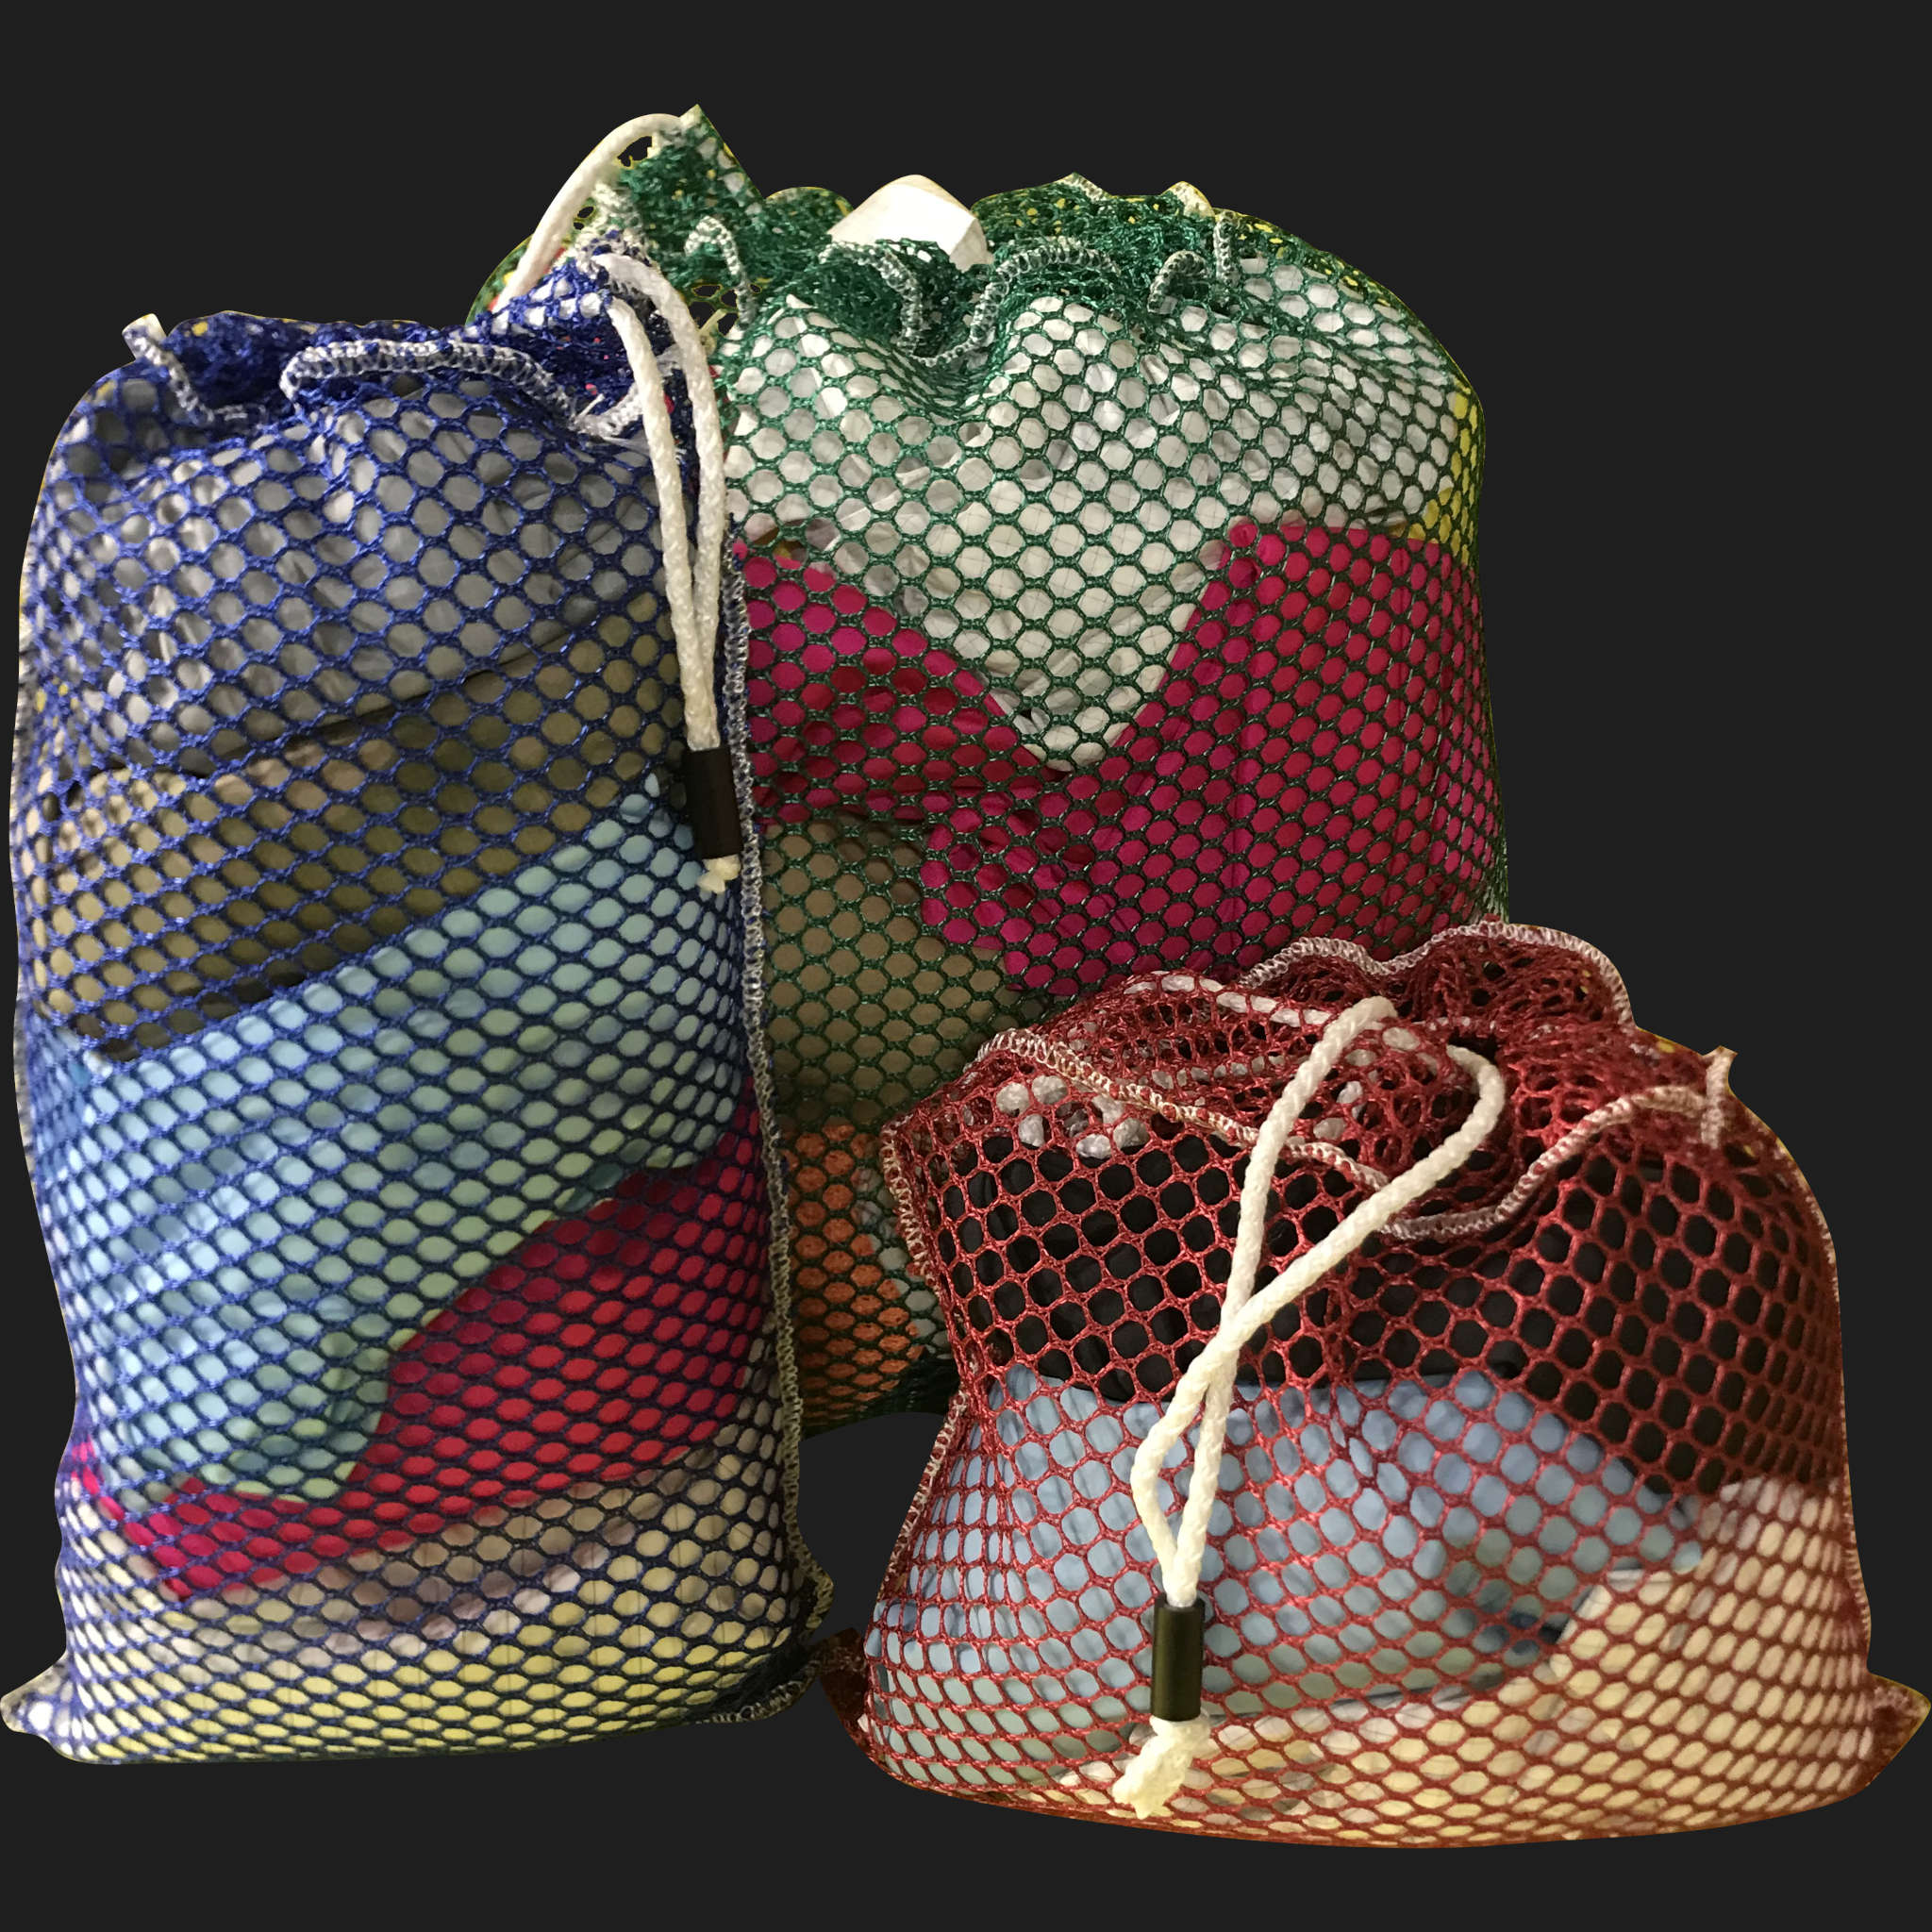 18" x 28" Customized Mesh-Net-Laundry Bags Heavy Duty with Cord and barrellock closure